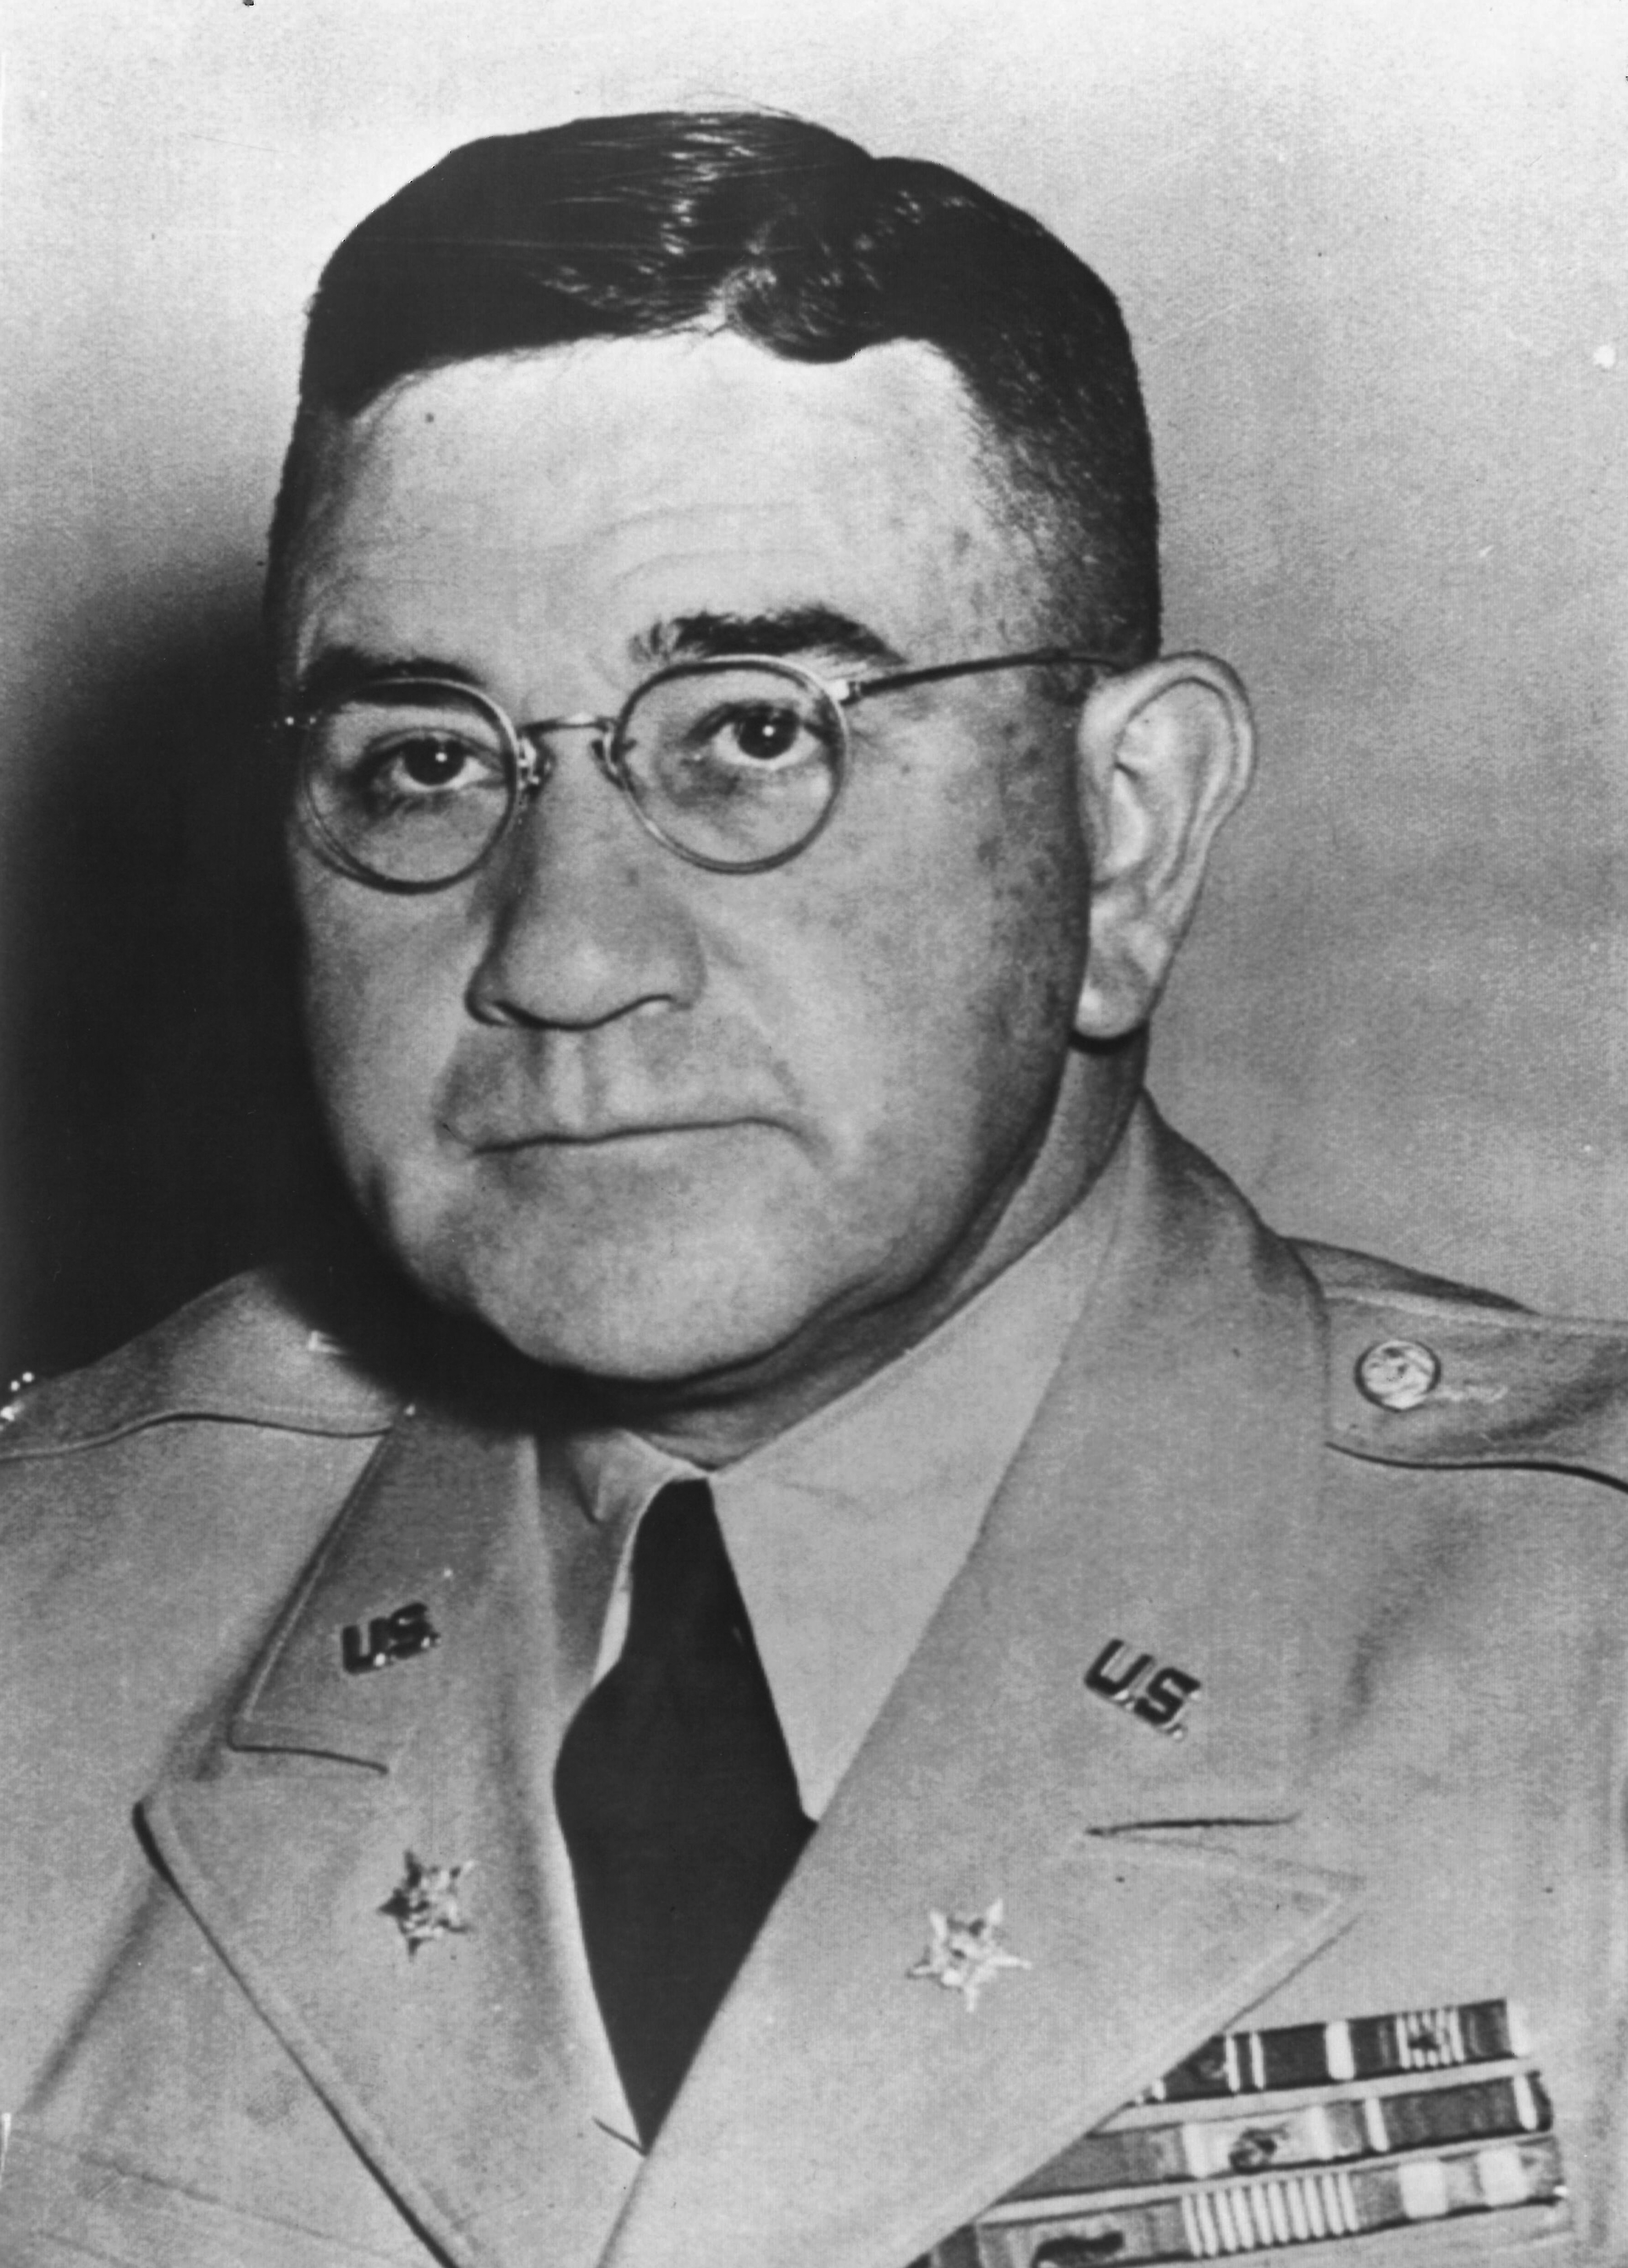 Brigadier General Charles F. Colson, the panel
        president in United States v. Schneeweis. (Photo
        courtesy of author)